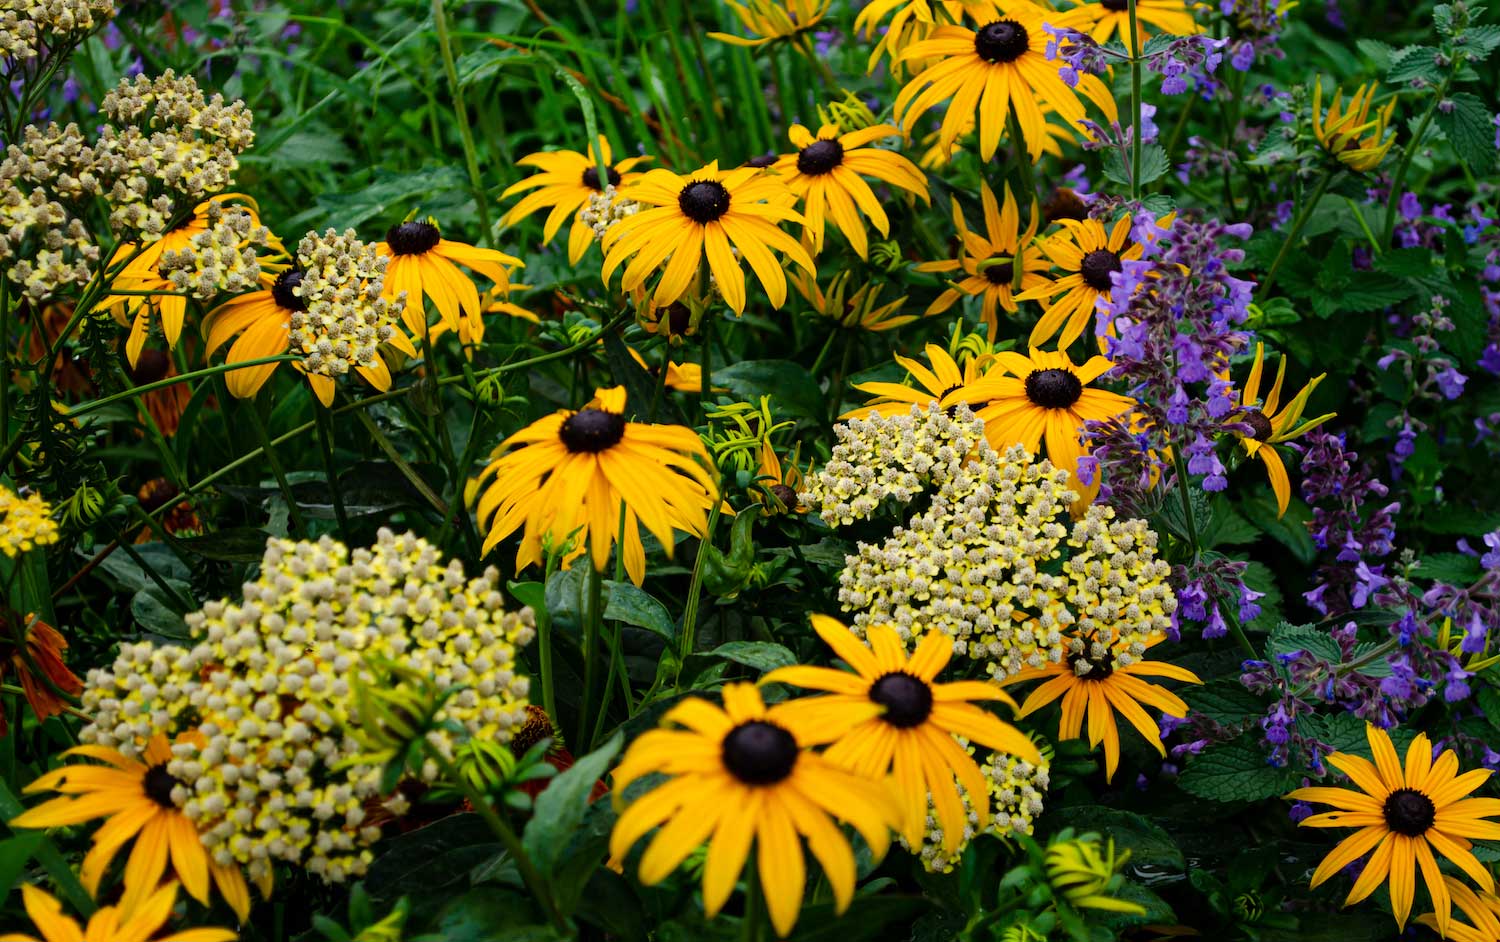 Native wildflowers include black-eyed Susans.